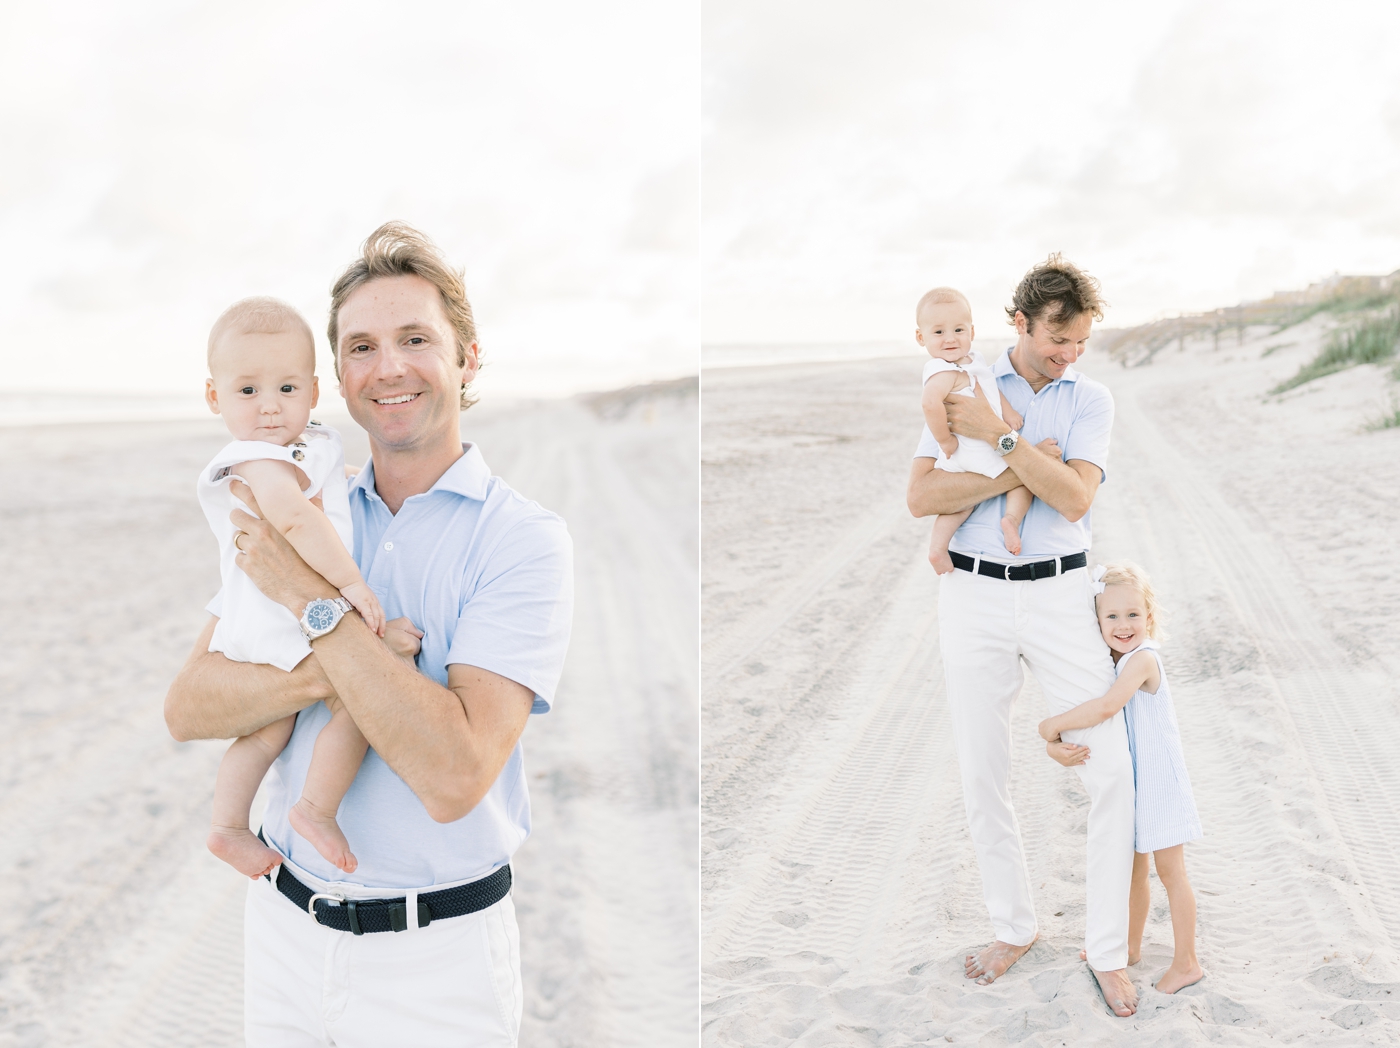 Dad and his little ones on the beach | Photo by Caitlyn Motycka Photography.